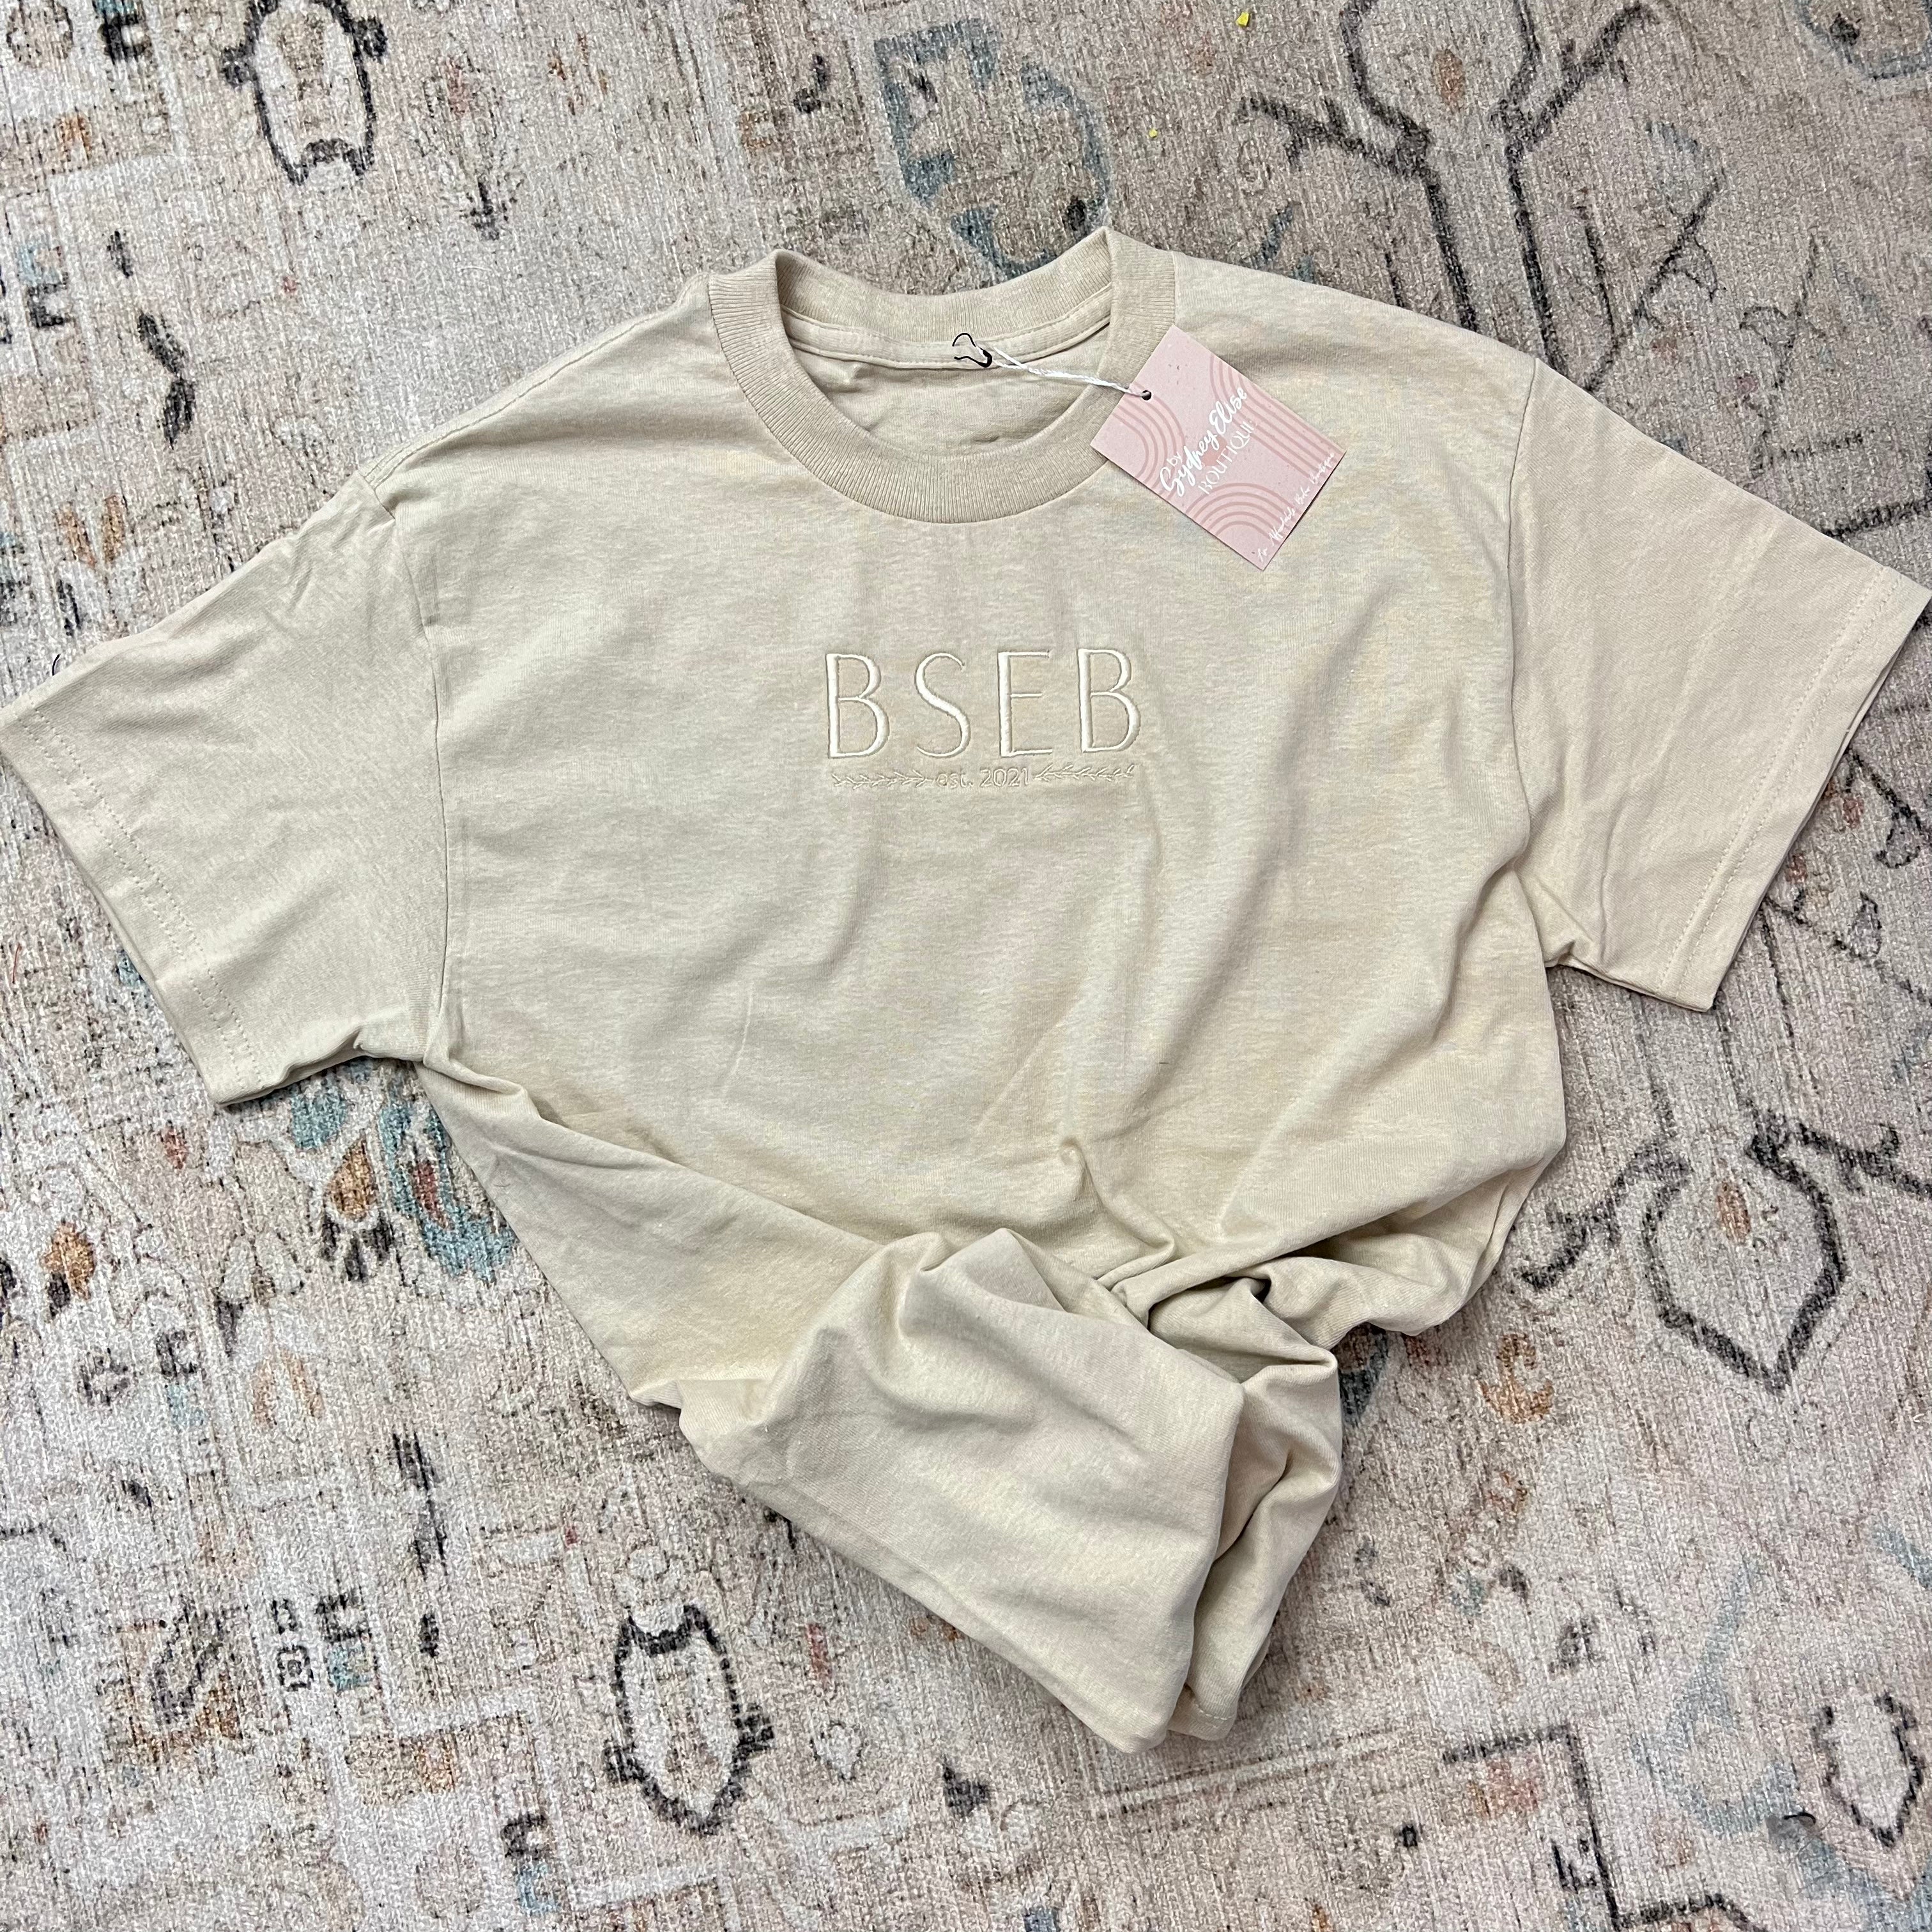 The Basic Tee by BSEB